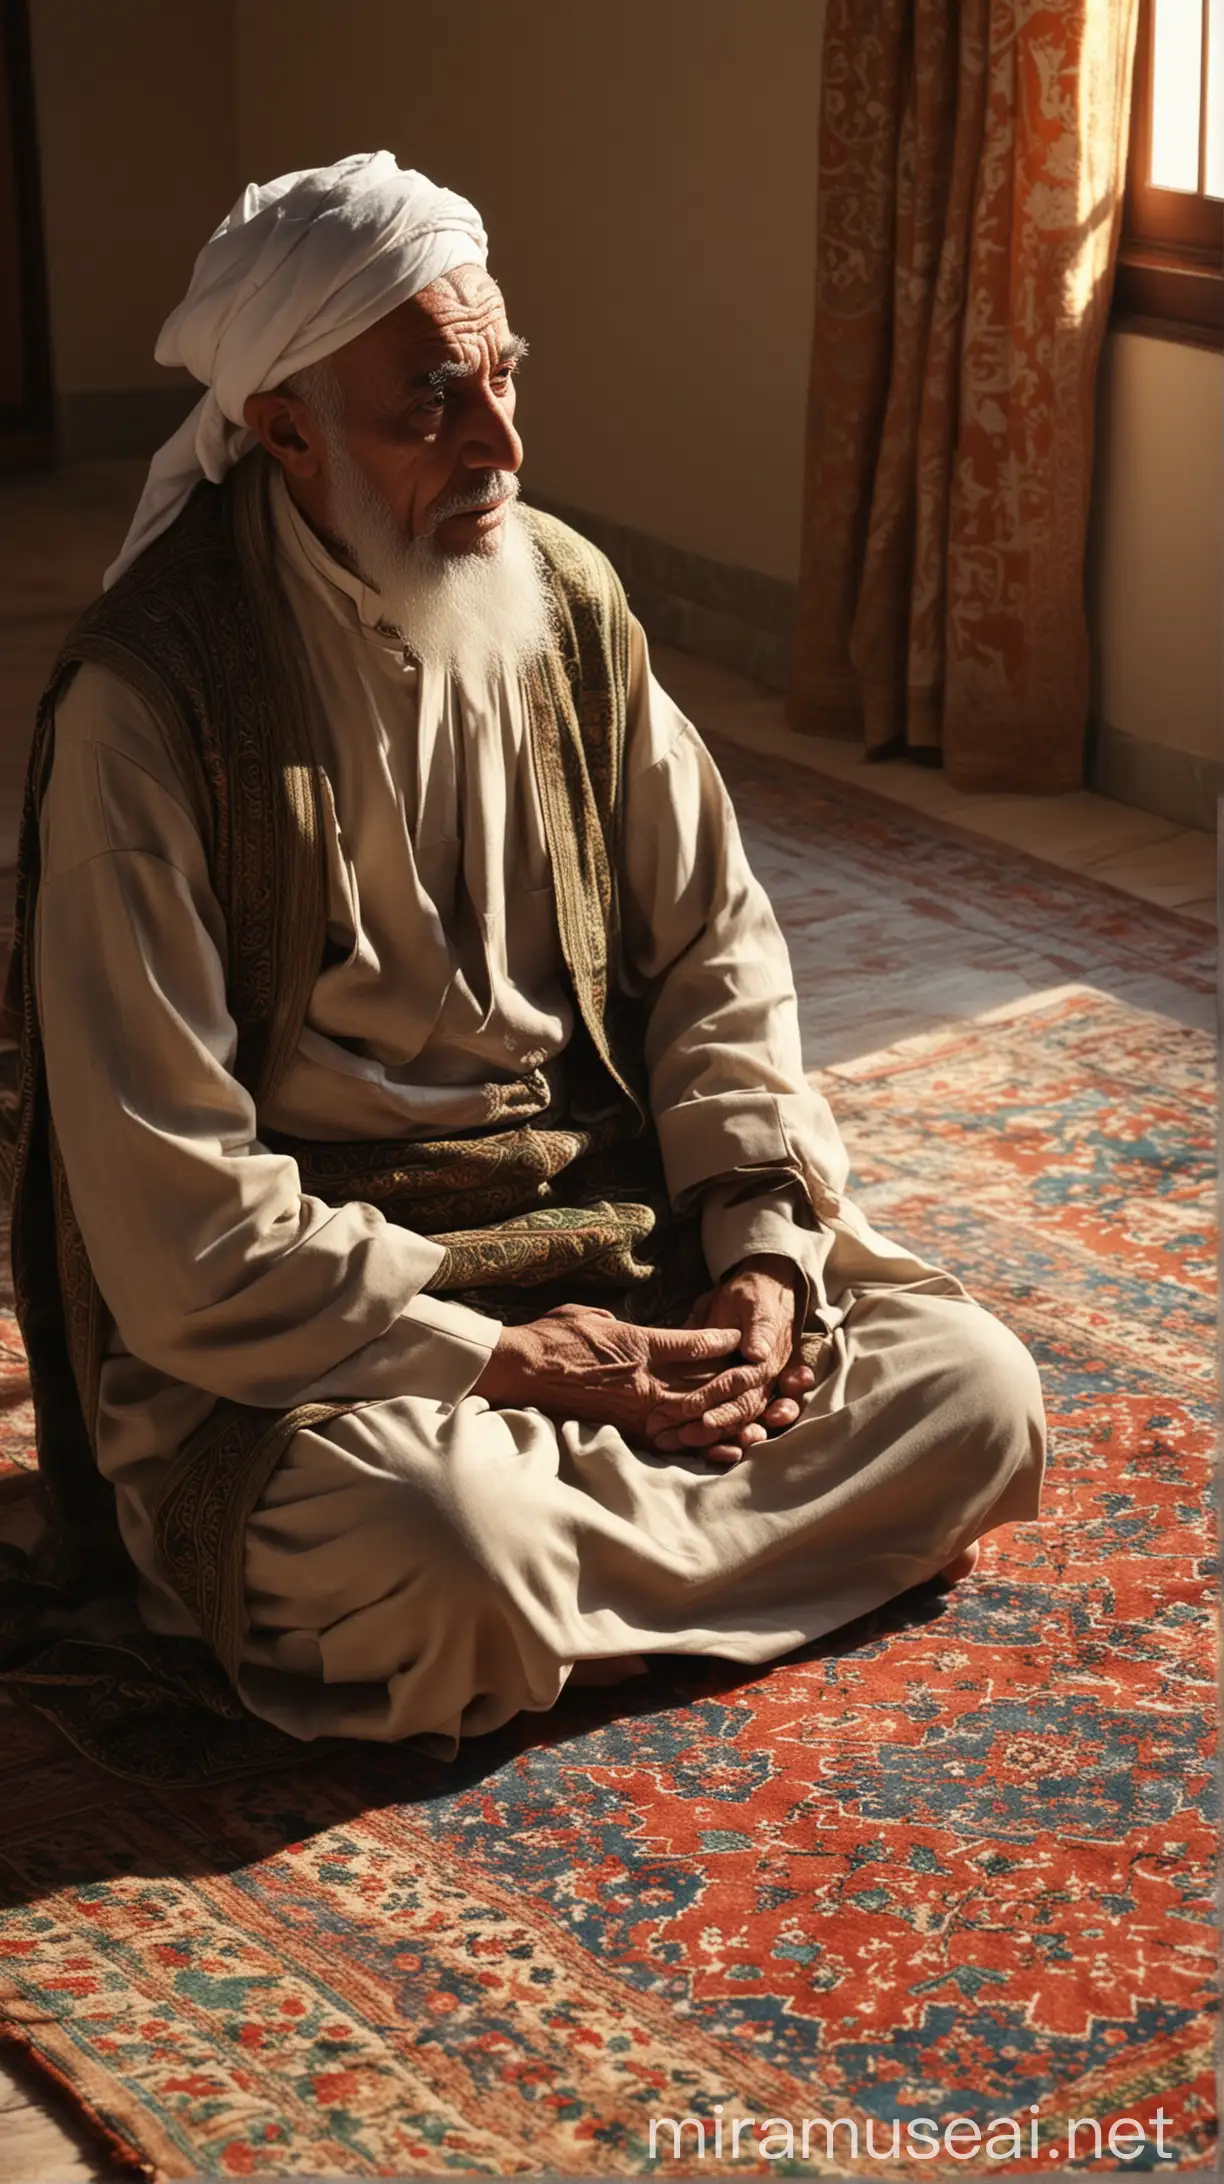 : Prophet Muhammad (SAW) Counsels Abdullah ibn Abbas
Description: An elderly Prophet Muhammad (SAW) with a kind expression sits on a prayer rug, offering solace to a young, anxious Abdullah ibn Abbas. Soft sunlight streams through a window, illuminating the peaceful scene. with islamic tradition and HD and 4K